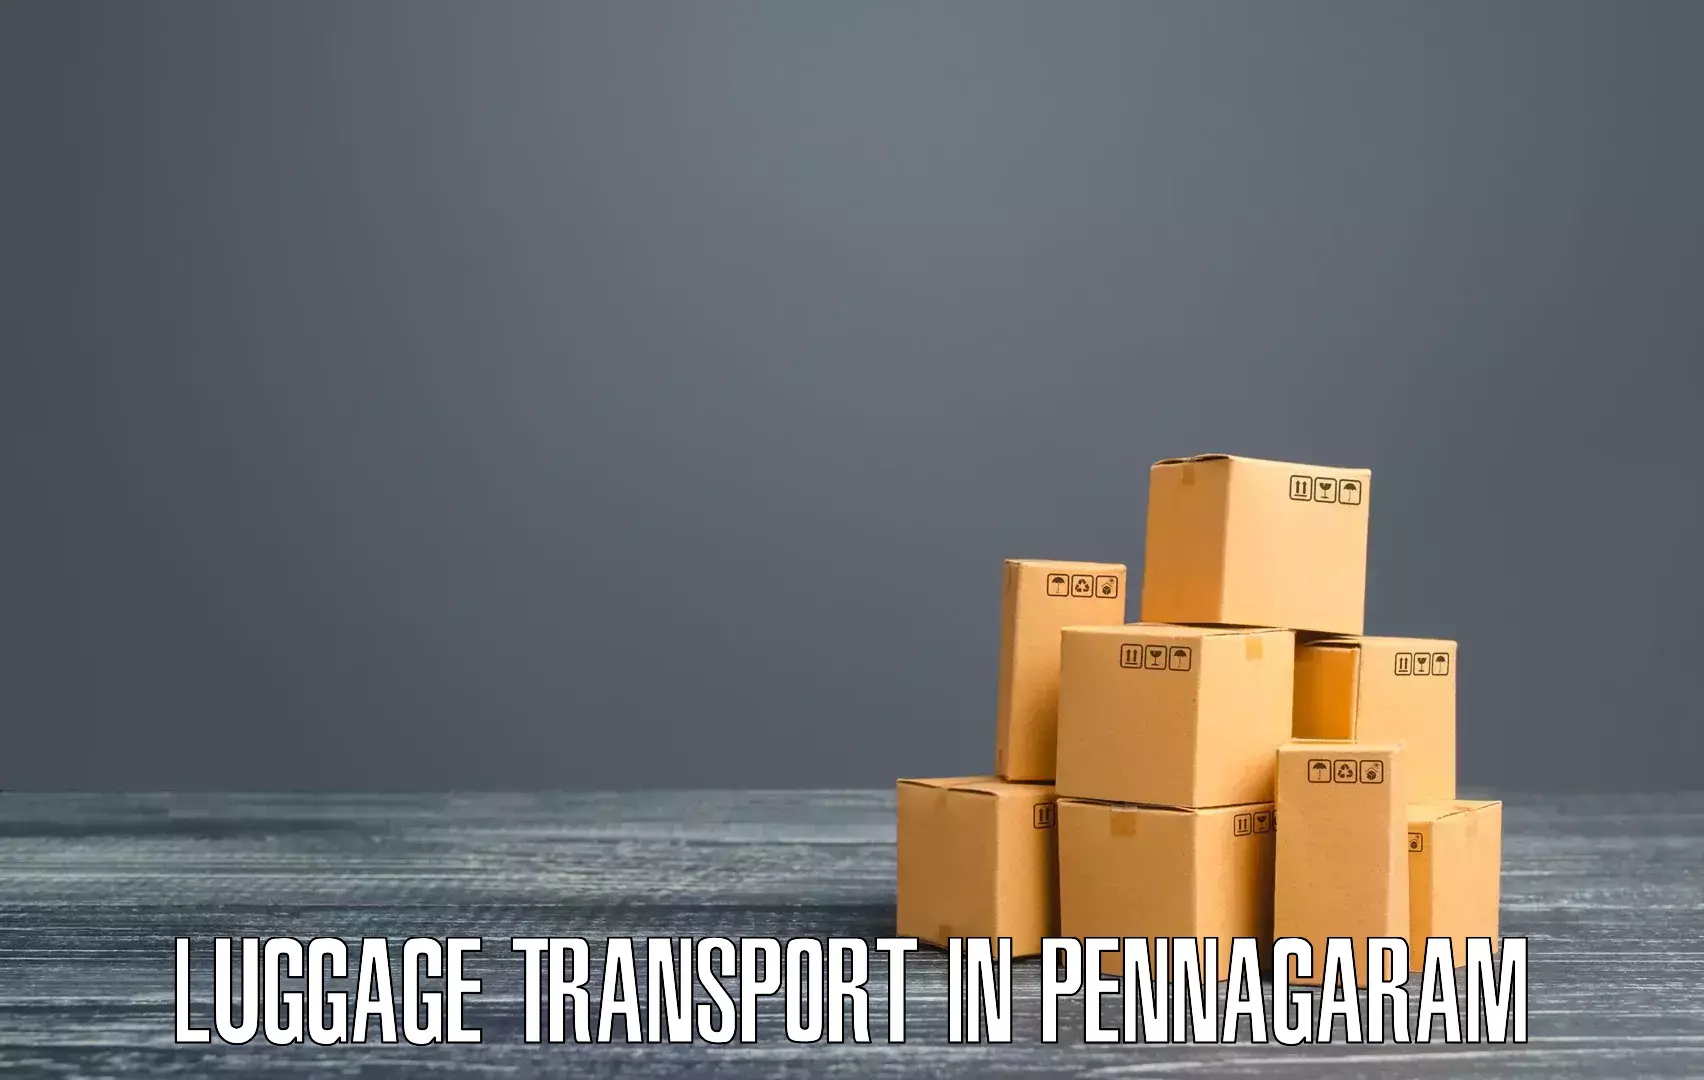 Instant baggage transport quote in Pennagaram